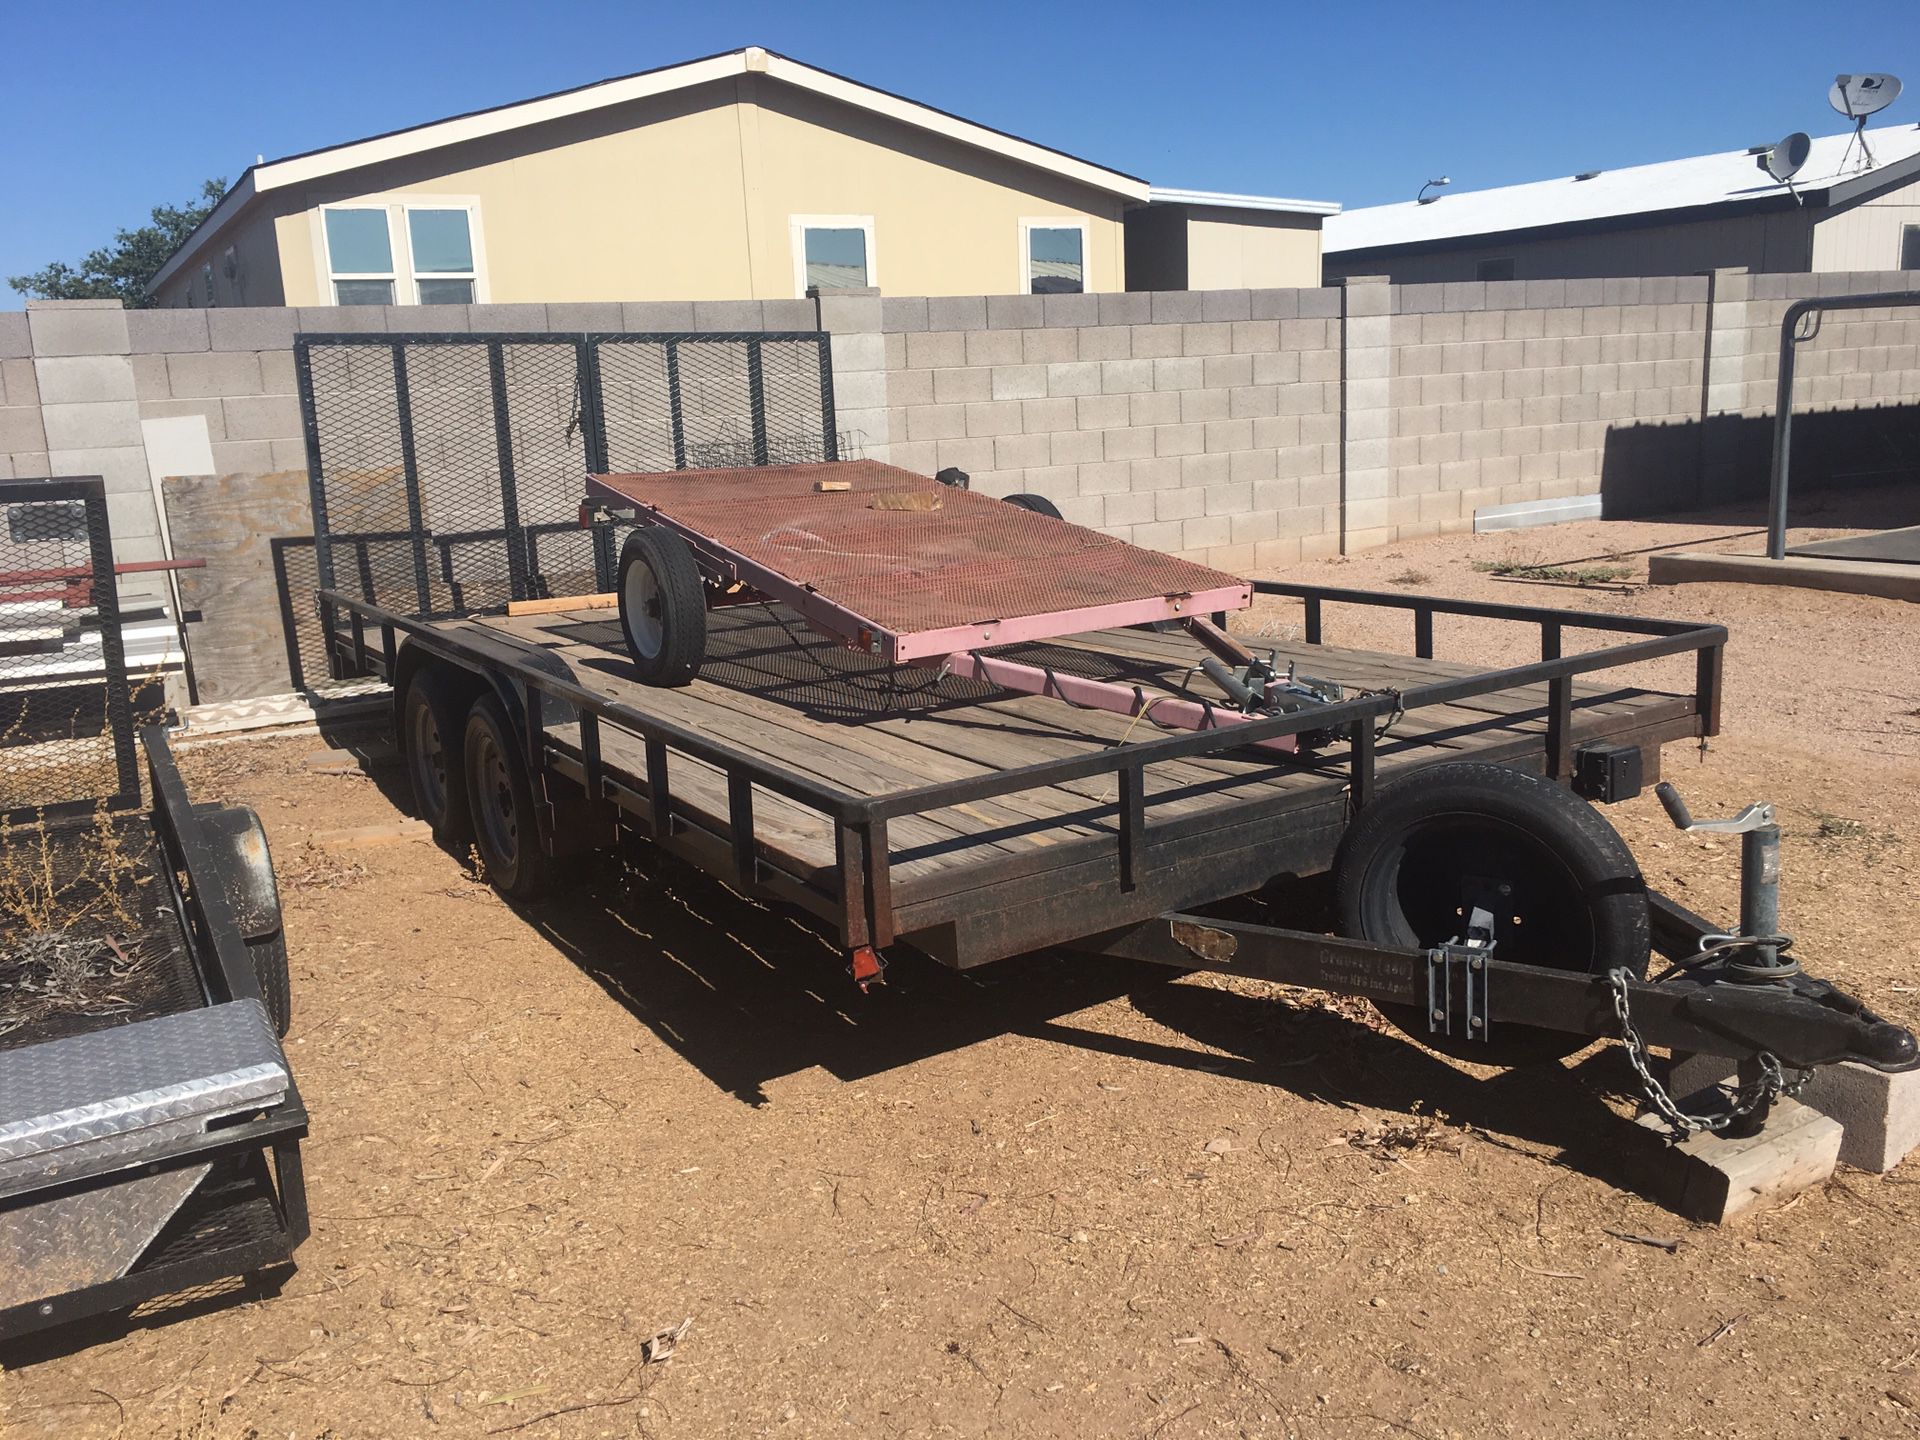 16x8 flatbed car toy hauler trailer. New tires, double ramp gate. Pulls great works great. $2250 obo.